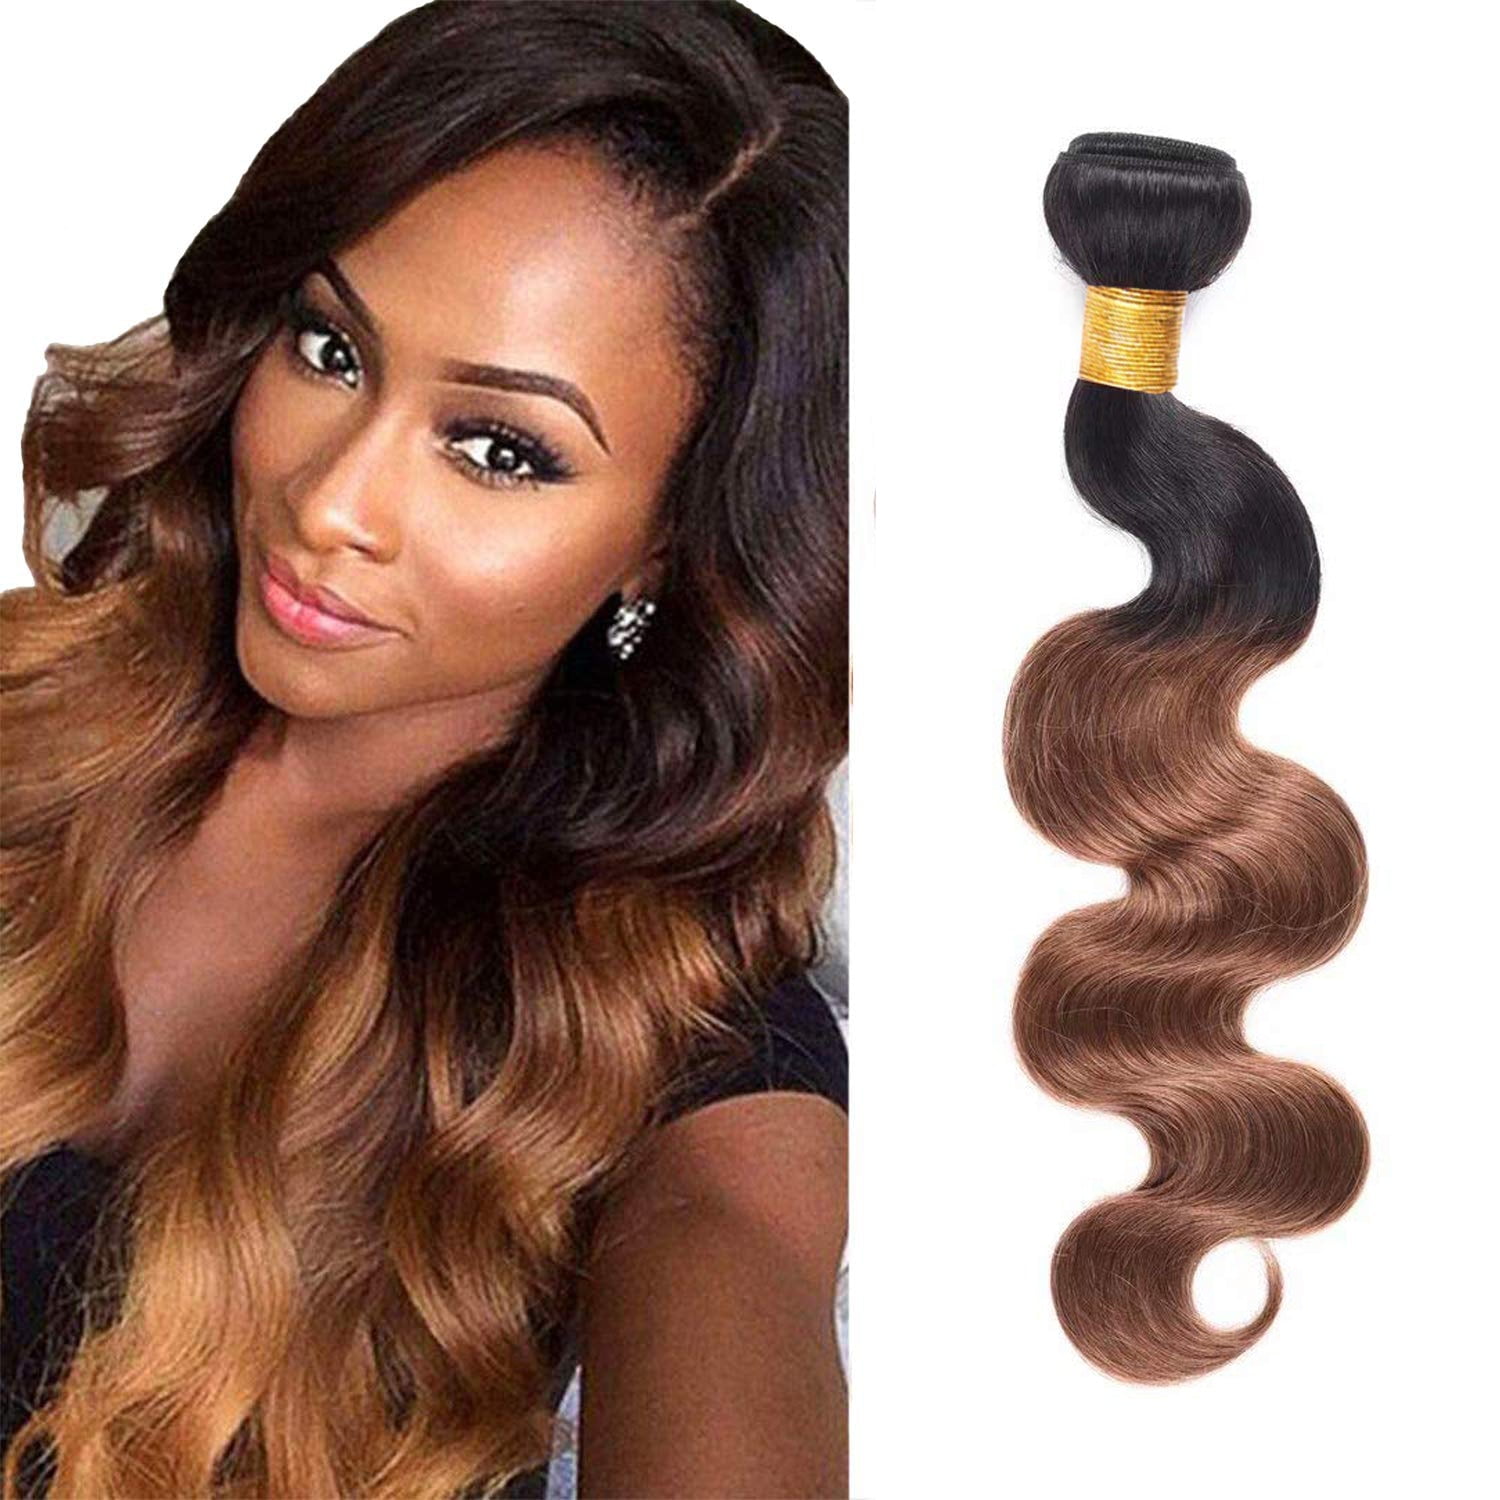 Buy 14inch  27 hair weave  Rongduoyi Sew in Hair Extensions Human Hair  Weave Honey Blonde27 Straight Colored 100 Peruvian Remy Human Hair Weave  Bundles 100gbundle 14inch Online at Low Prices